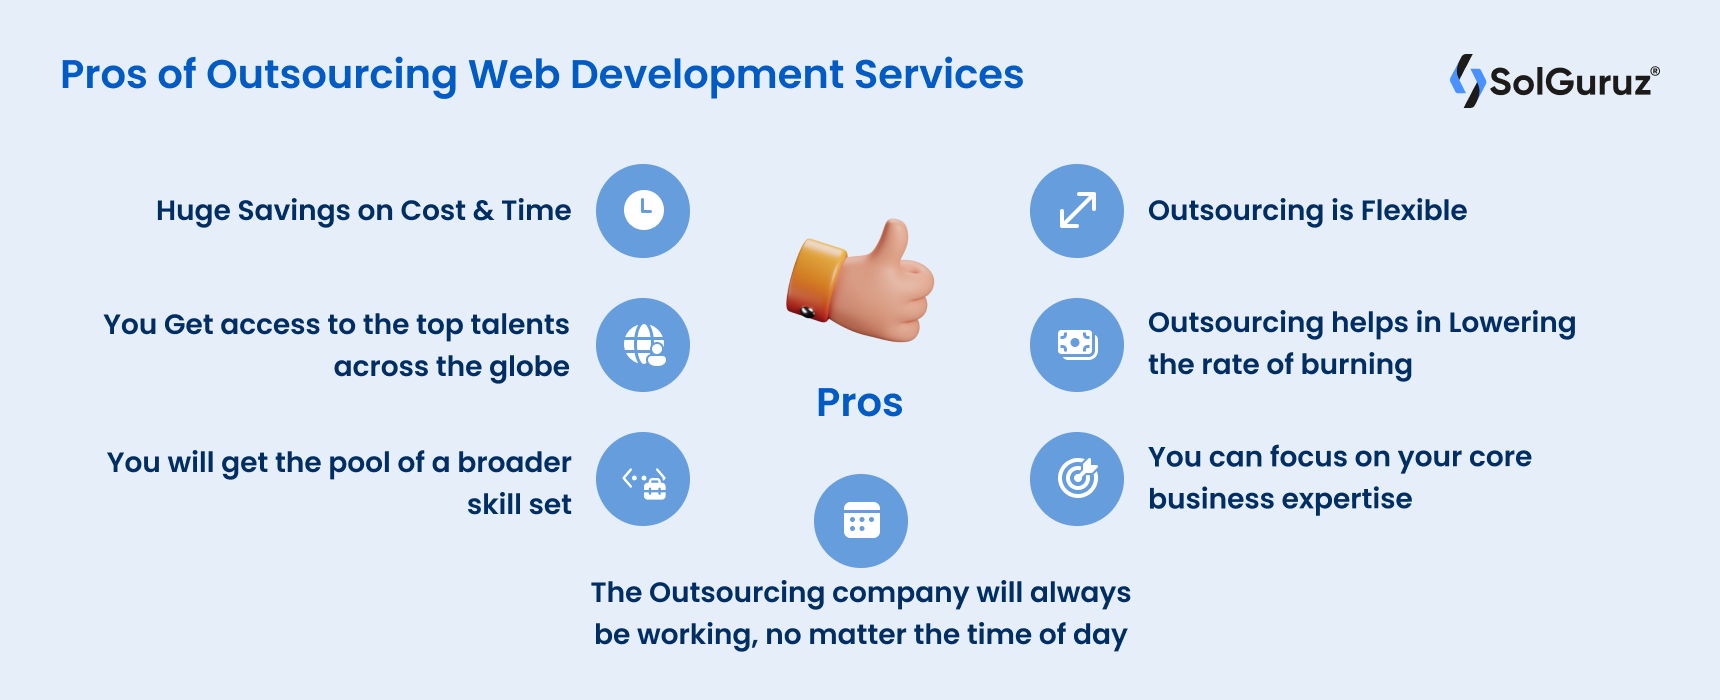 Pros of Outsourcing Web Development Services